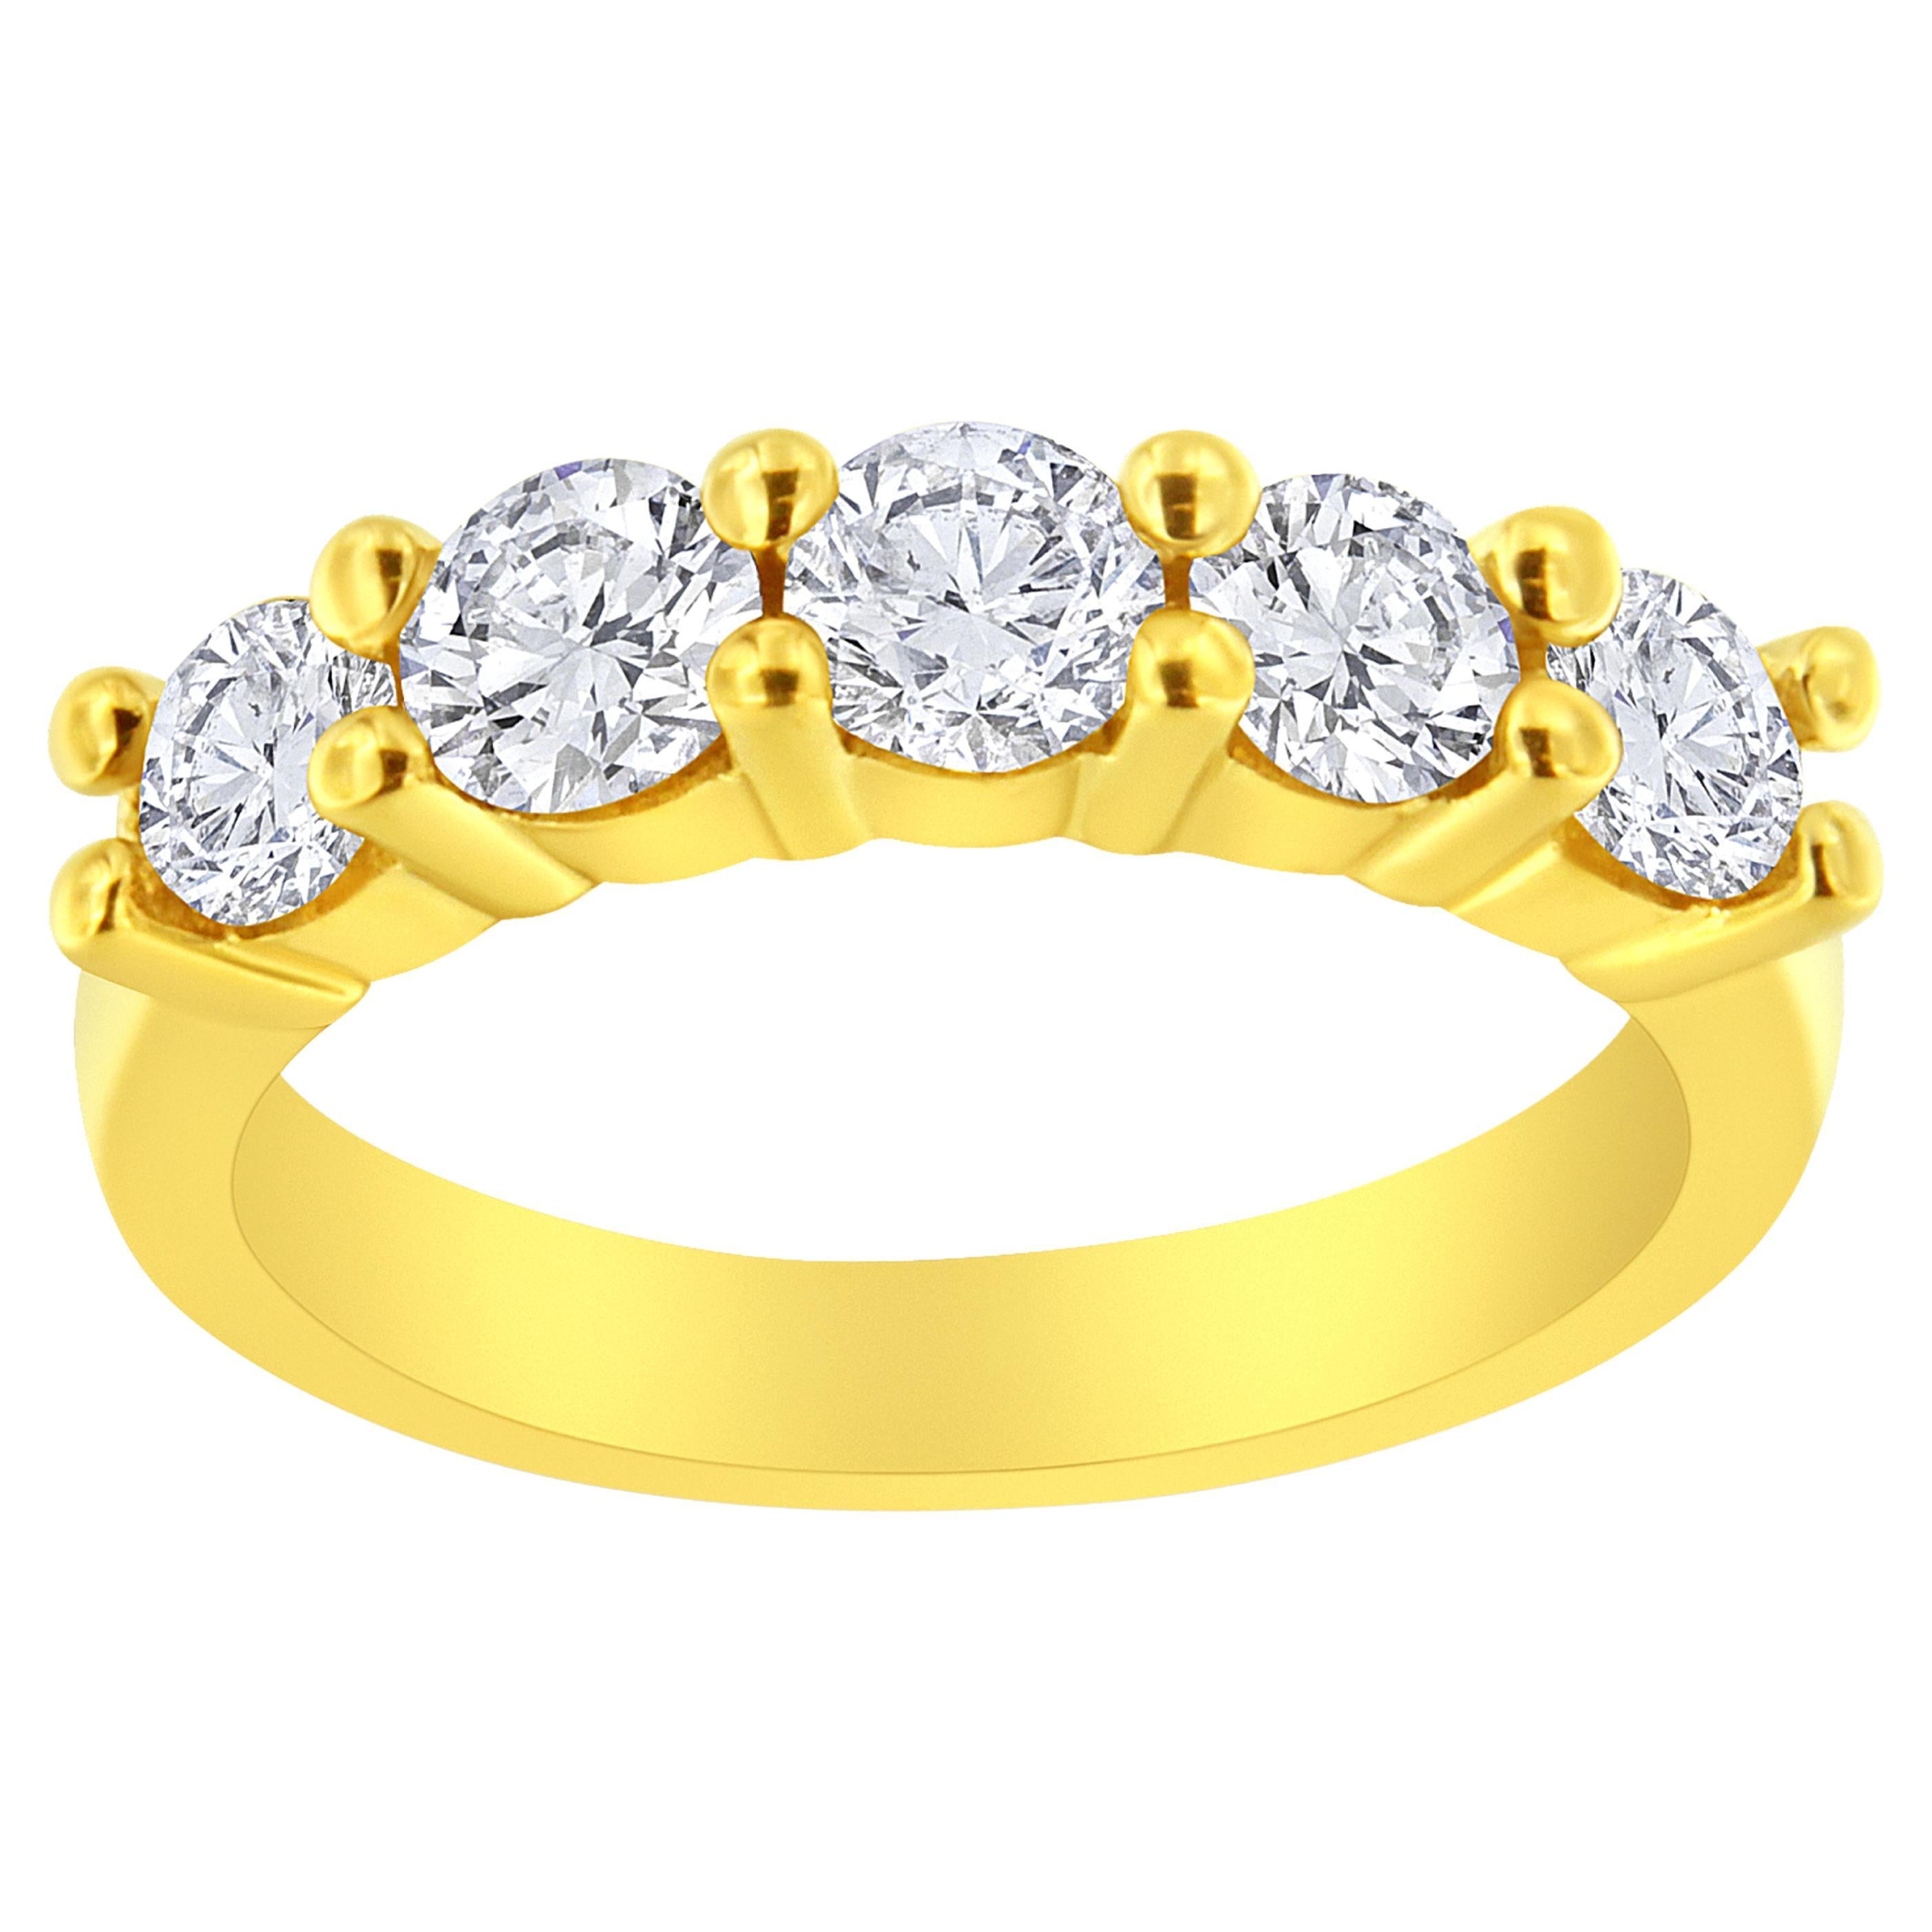 For Sale:  Yellow Gold Over Silver 1 1/2 Carat Diamond Anniversary or Wedding Band Ring